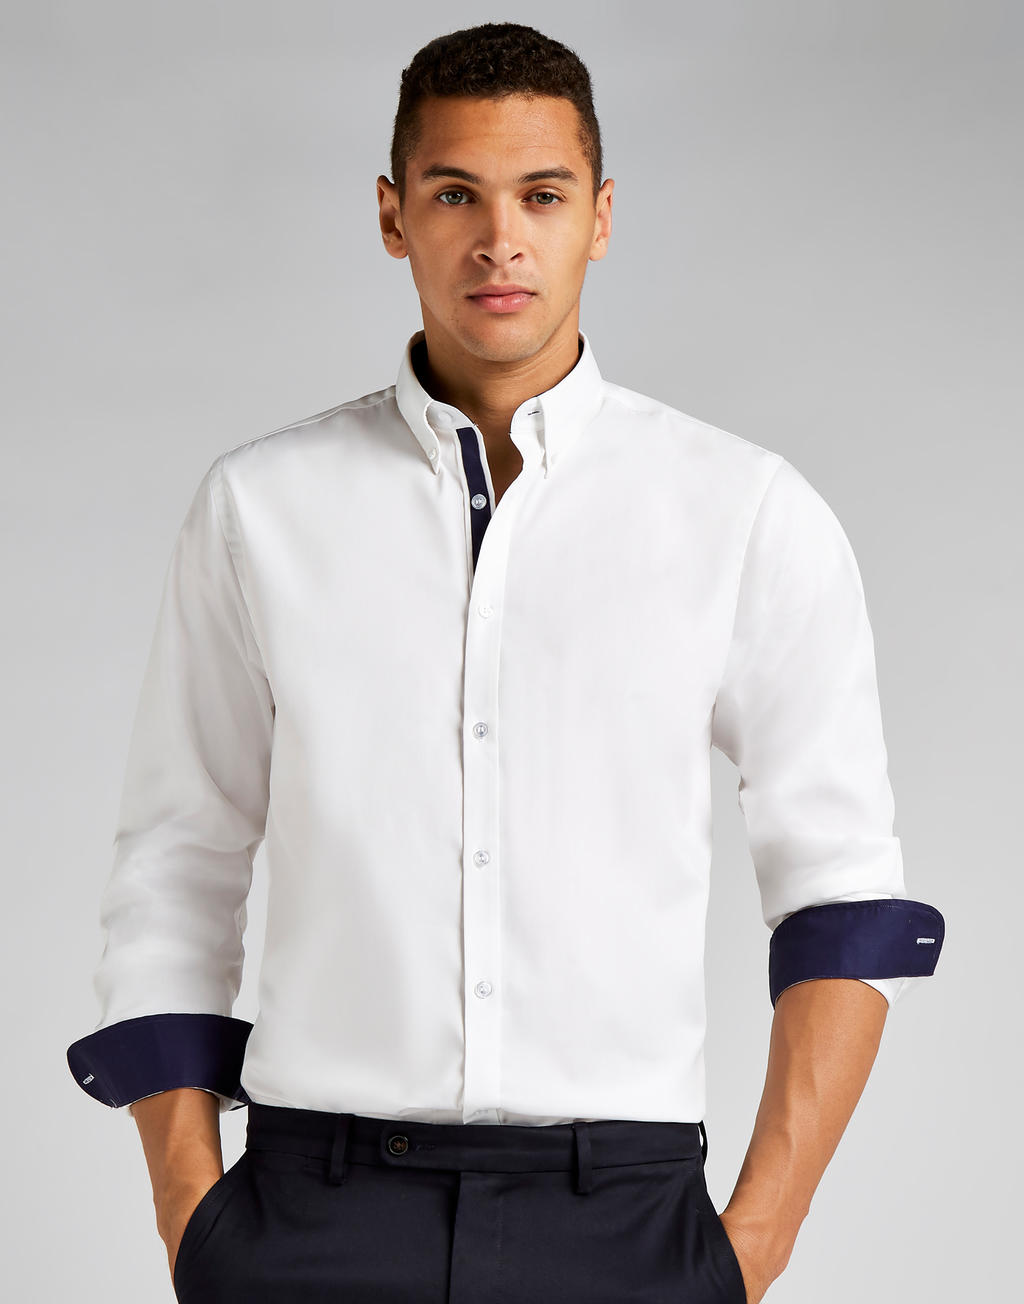  Tailored Fit Premium Contrast Oxford Shirt in Farbe White/Navy